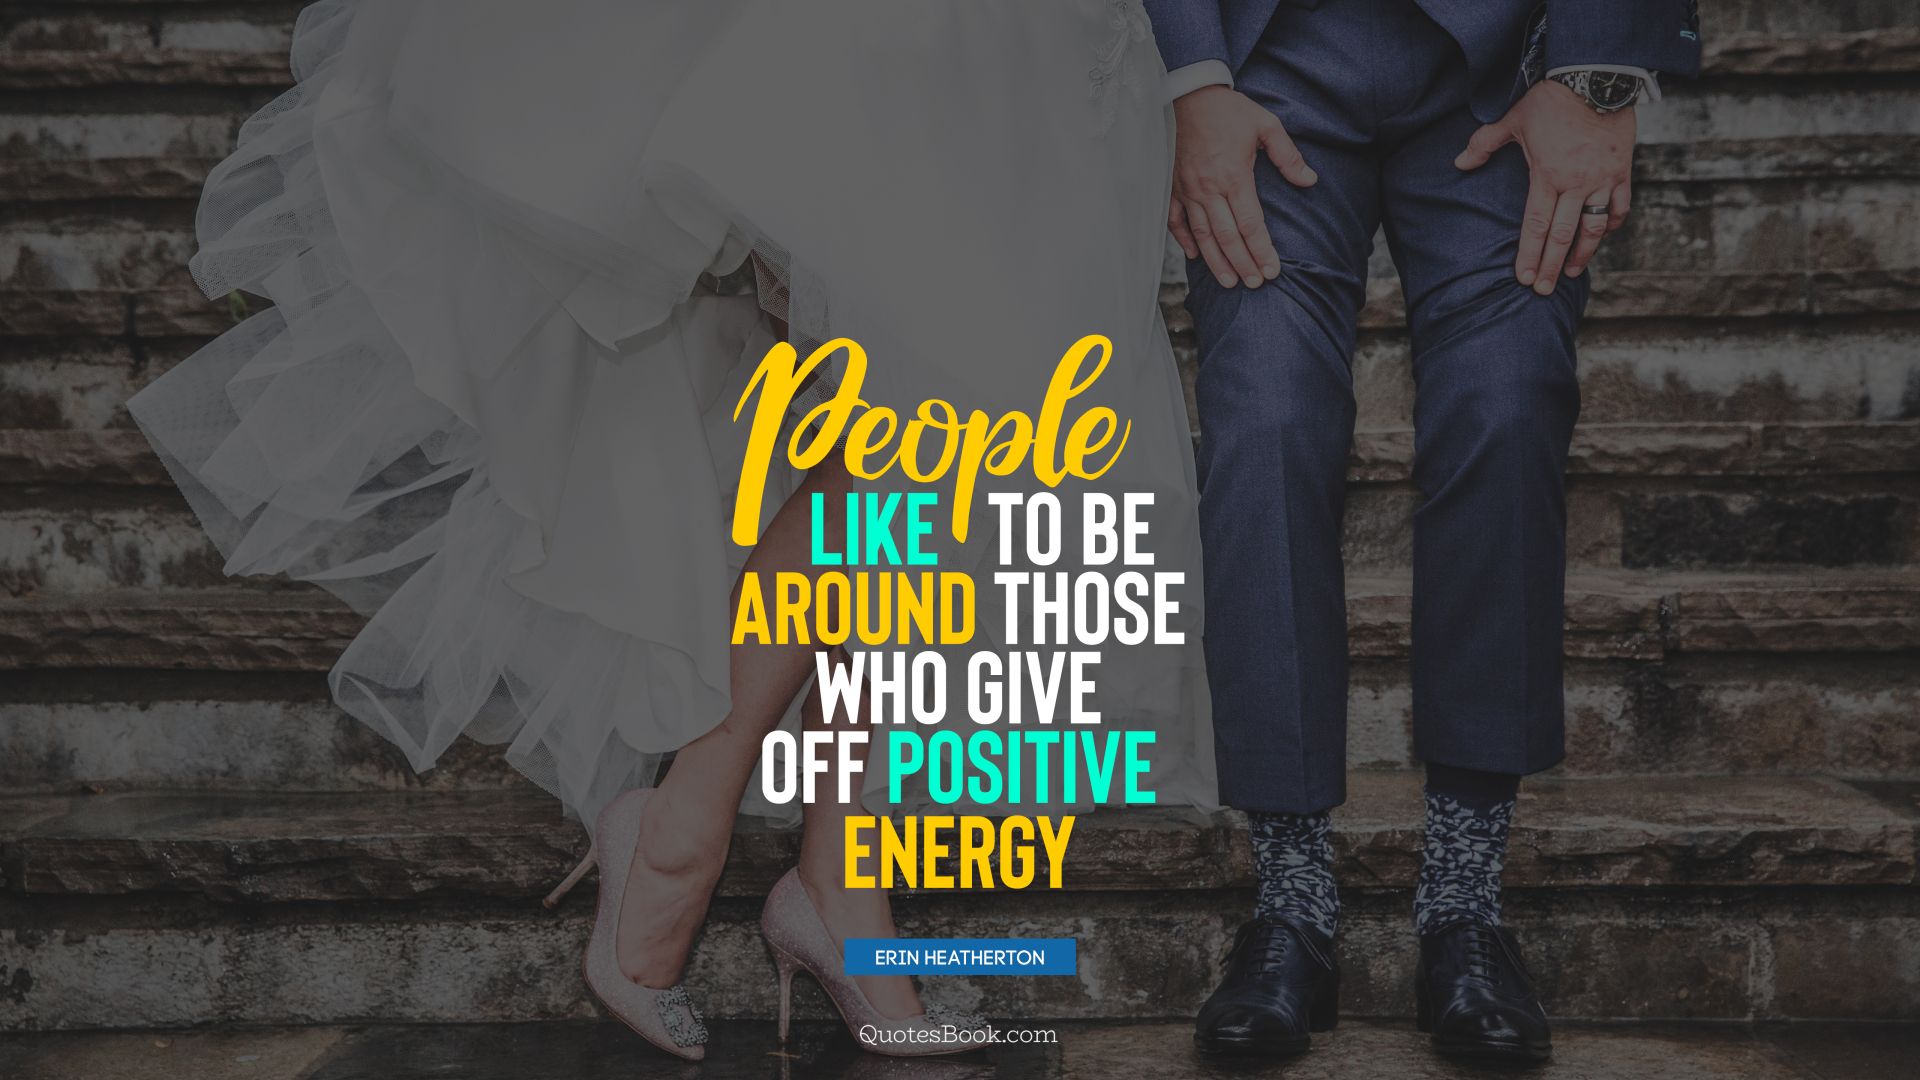 People like to be around those who give off positive energy. - Quote by Erin Heatherton